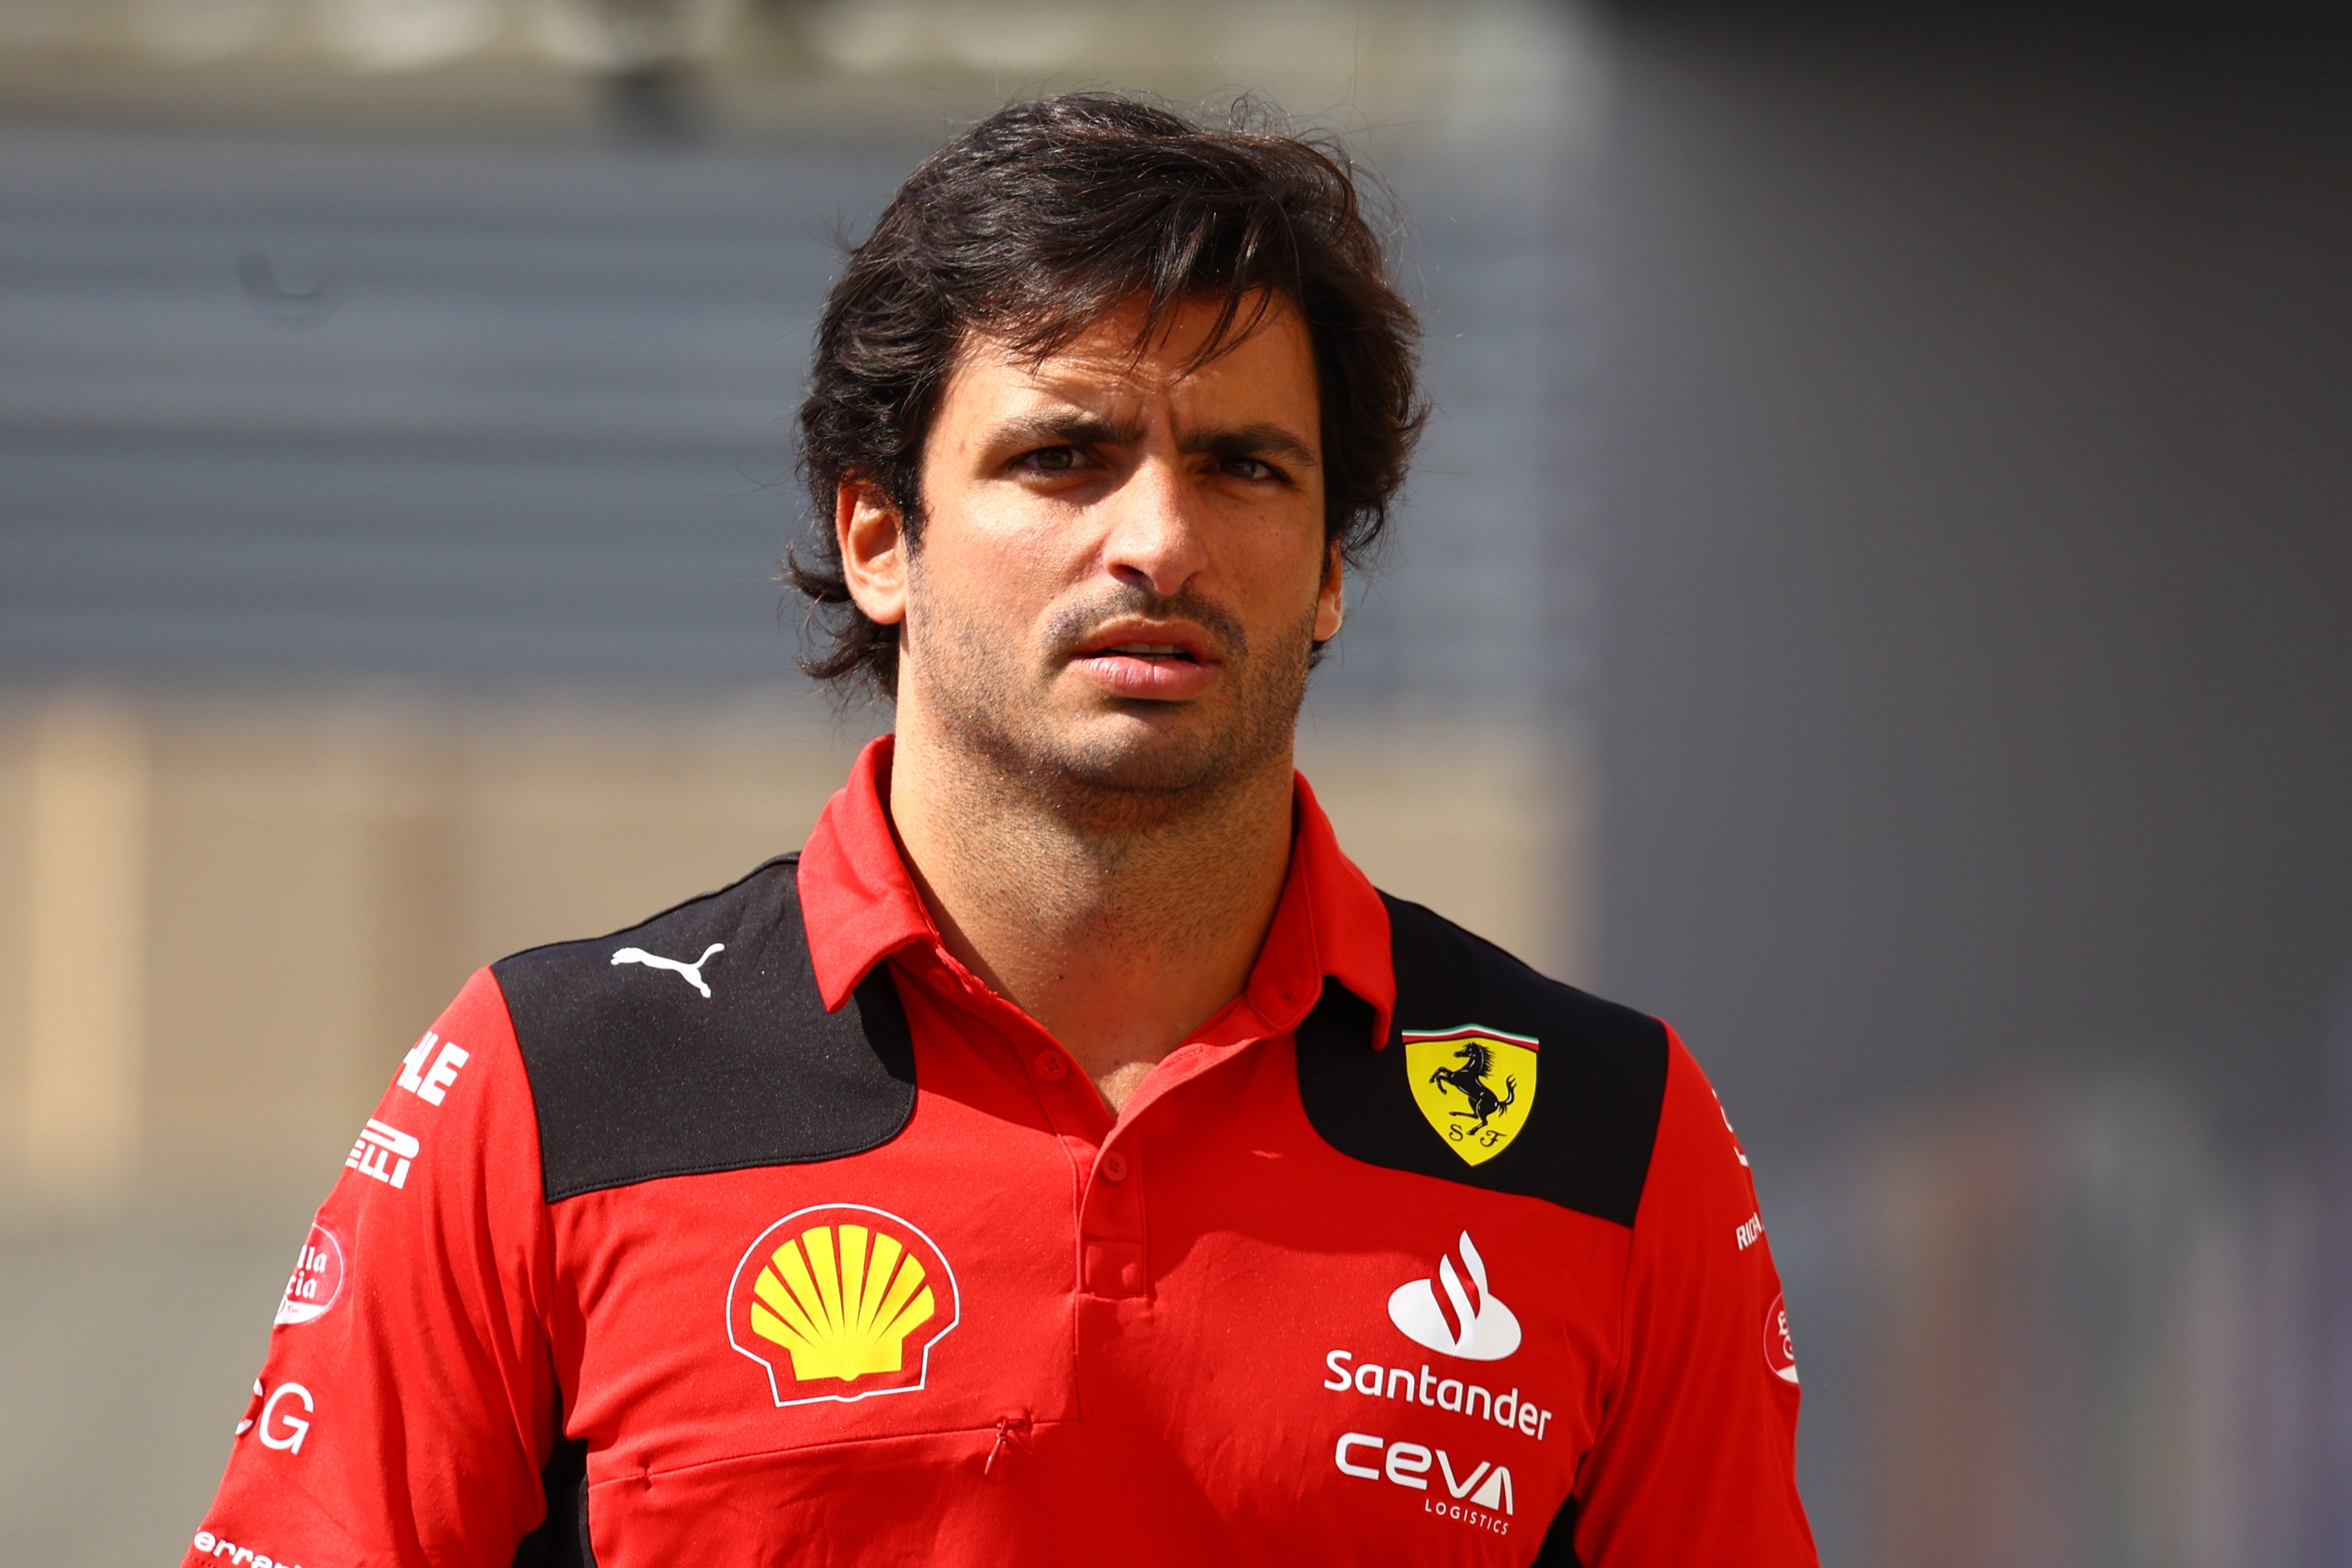 Carlos Sainz has been linked with a switch to Red Bull